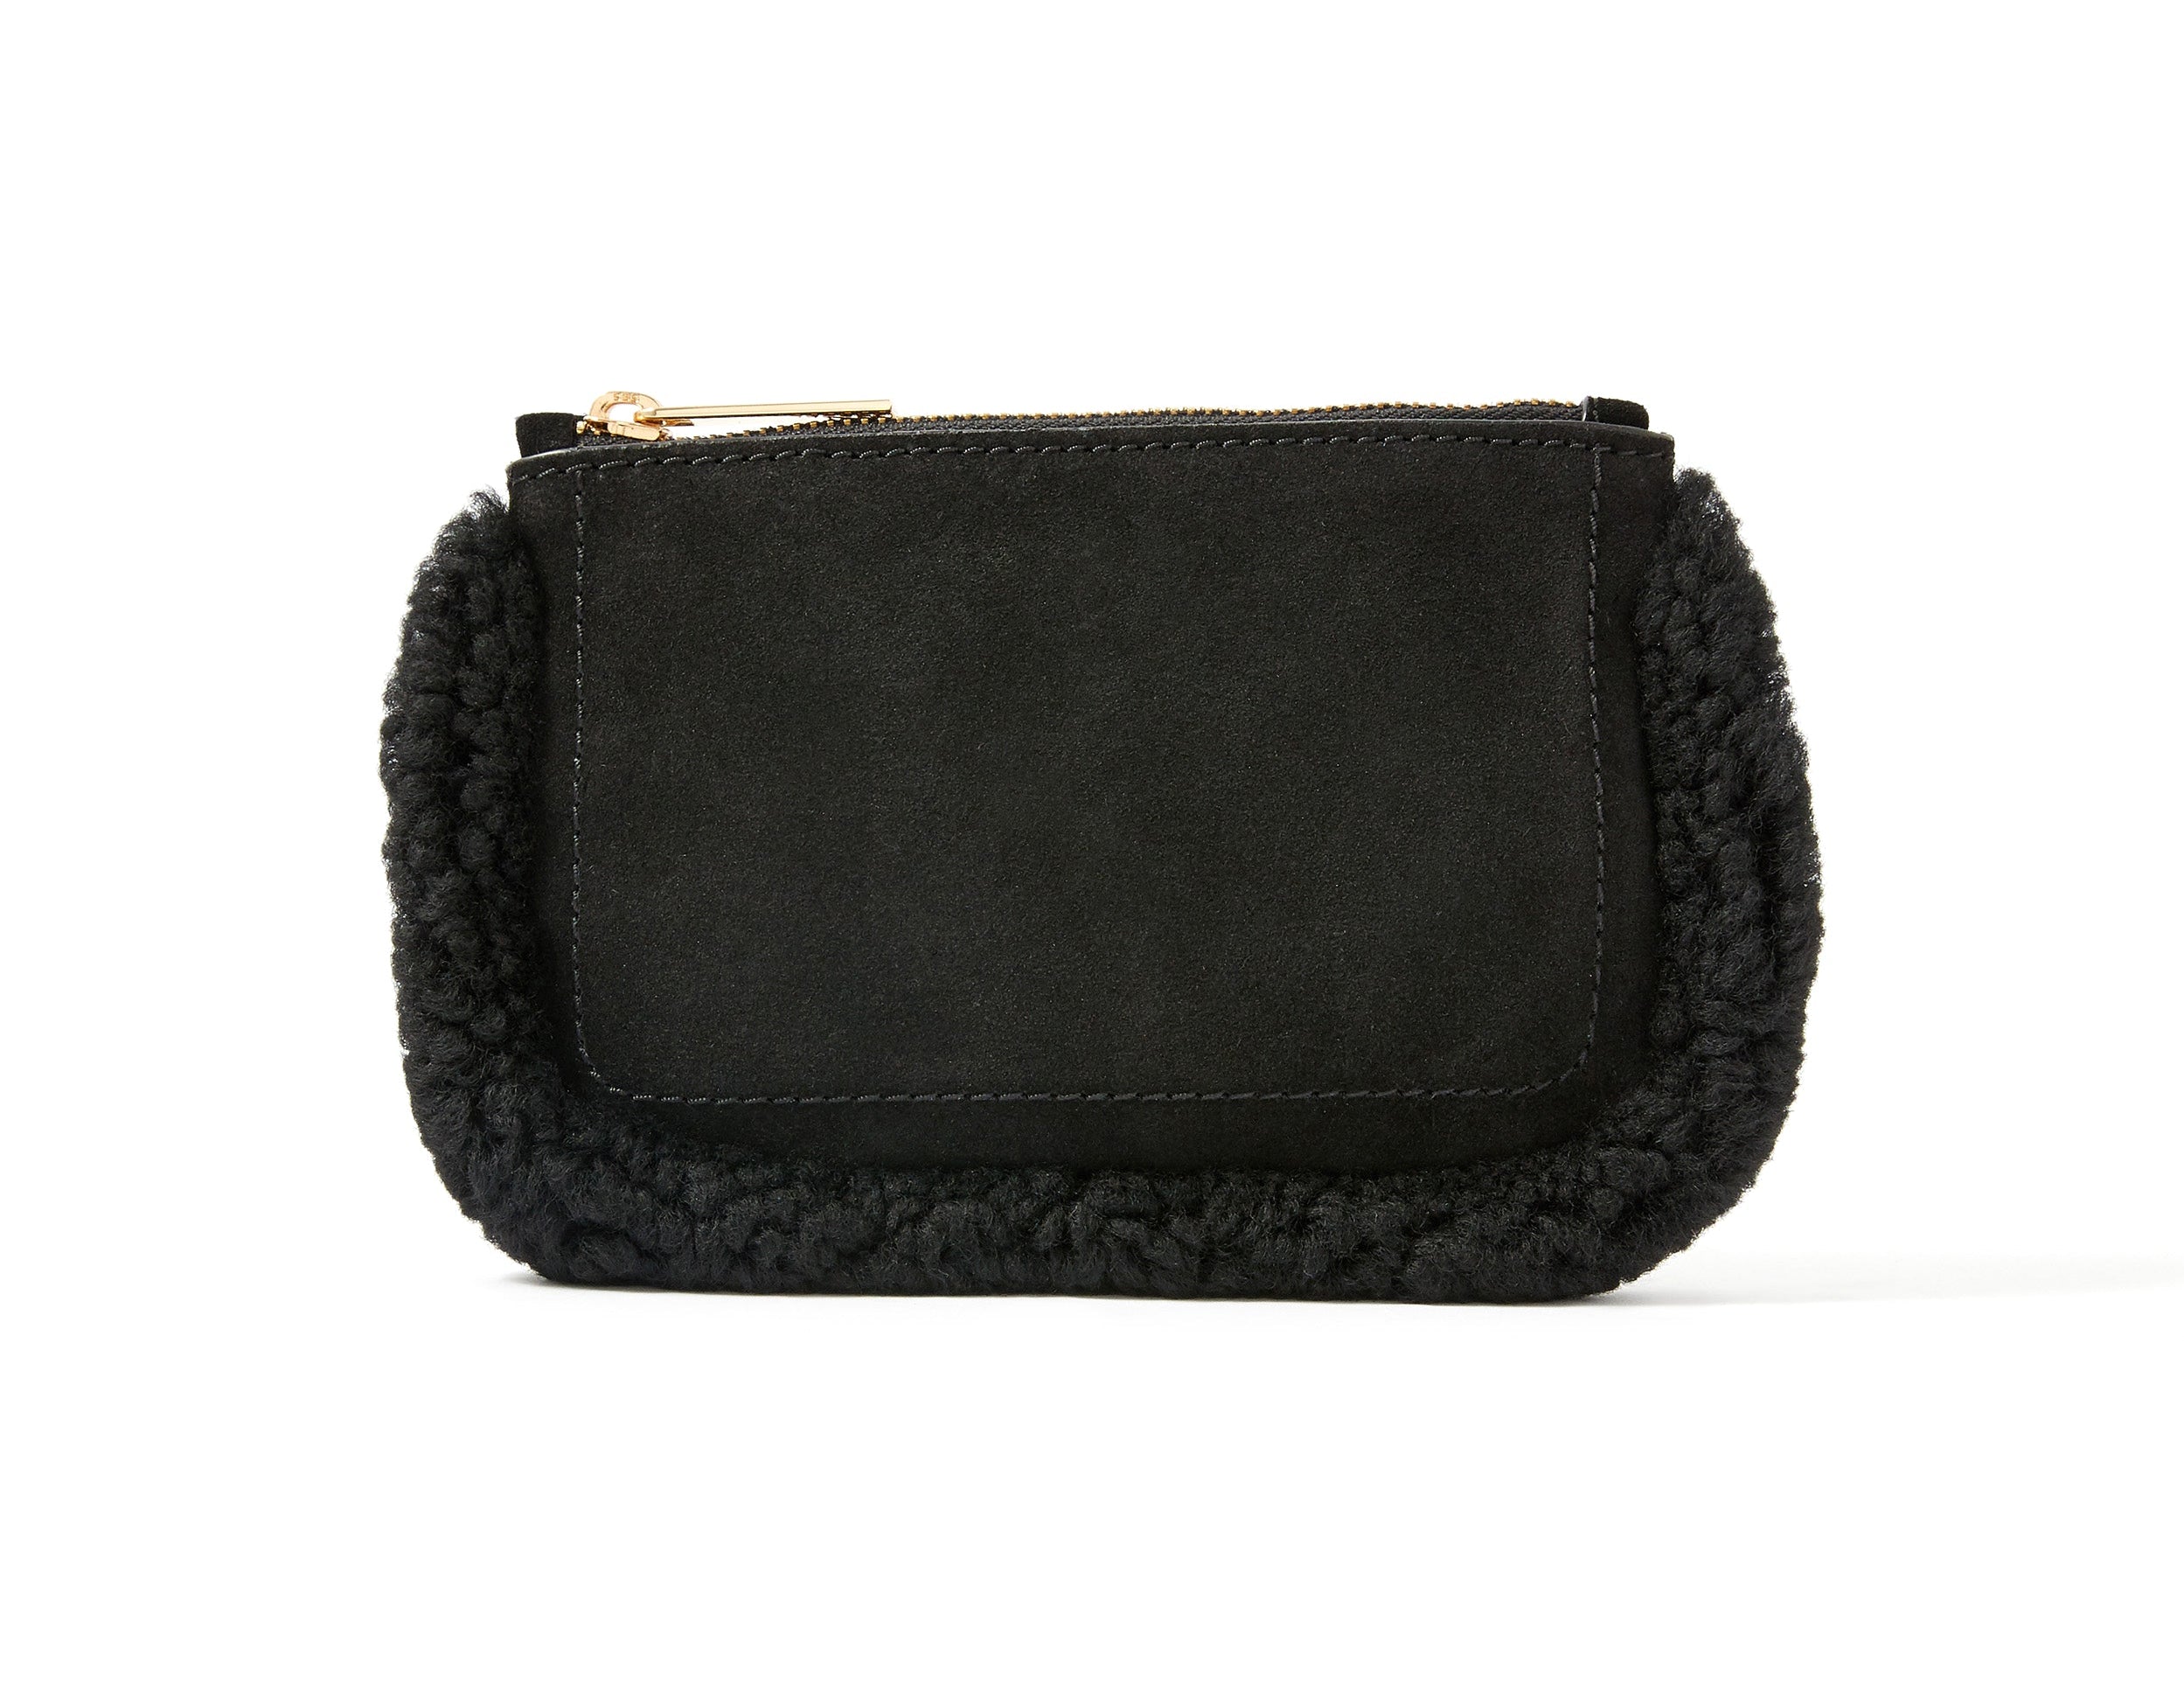 Accessorize London women's Real Leather Black Shearling Leather Pouch bag